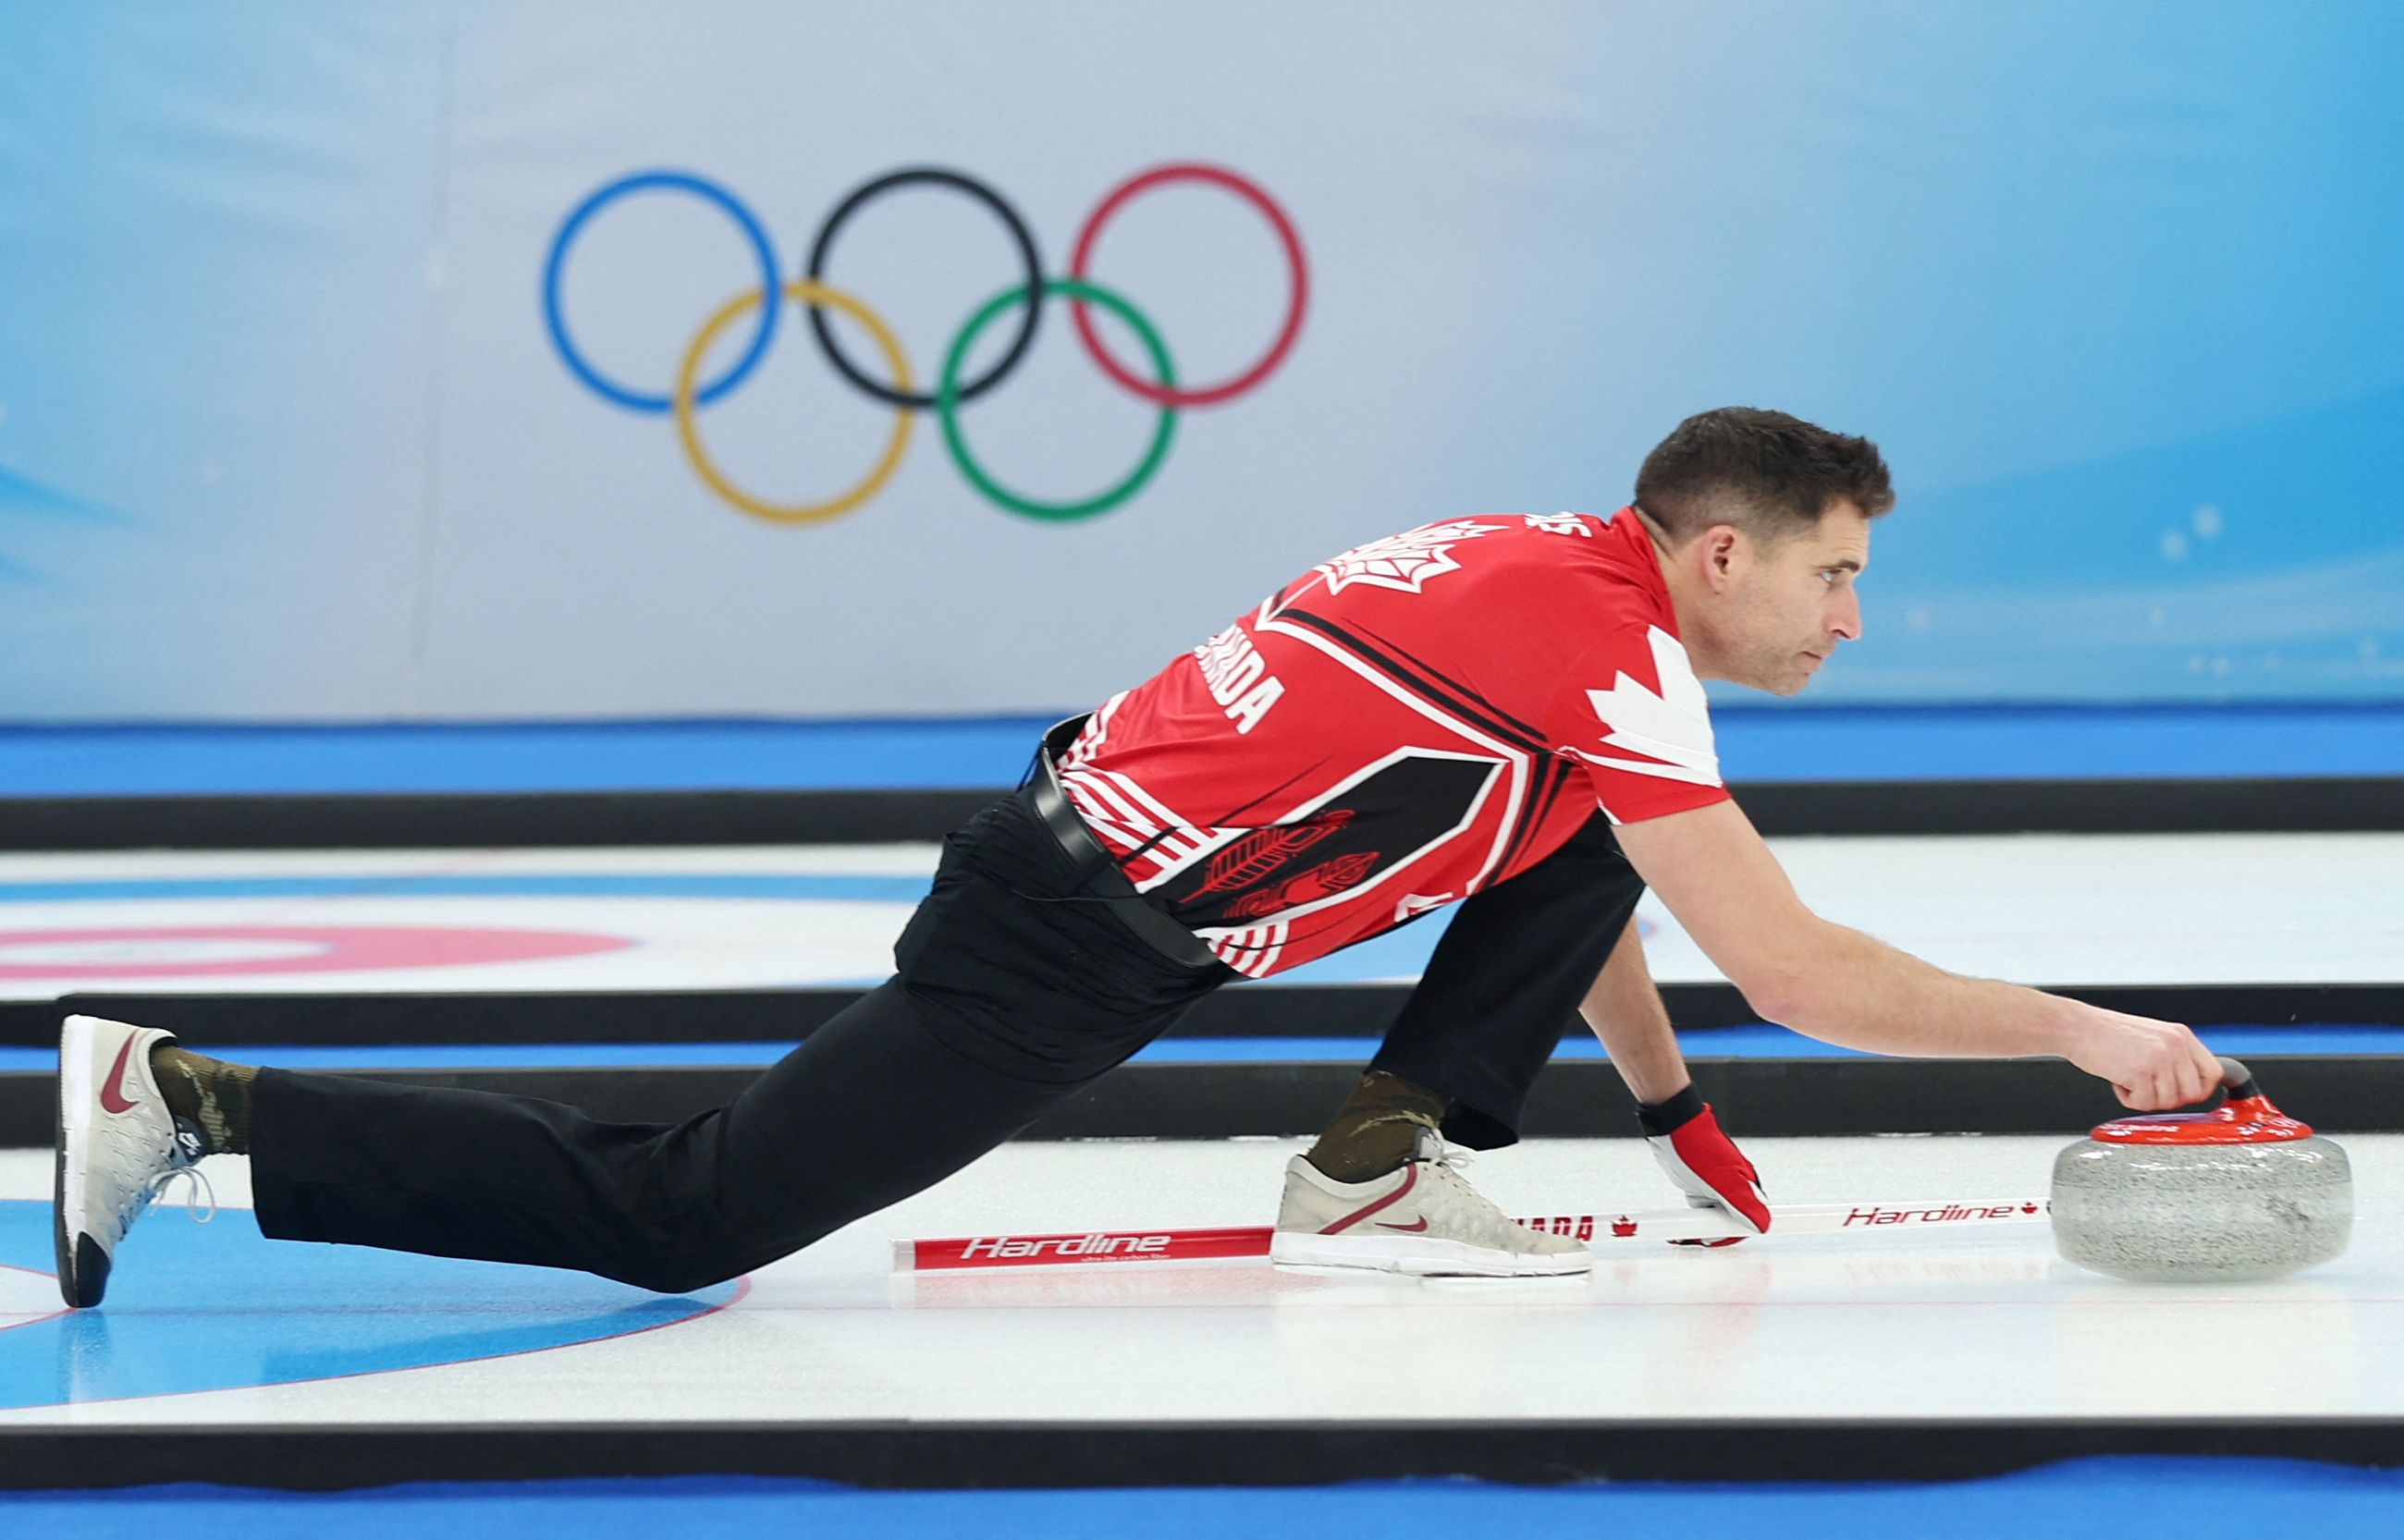 CurlingItaly secure first ever Olympic curling medal, to play Norway